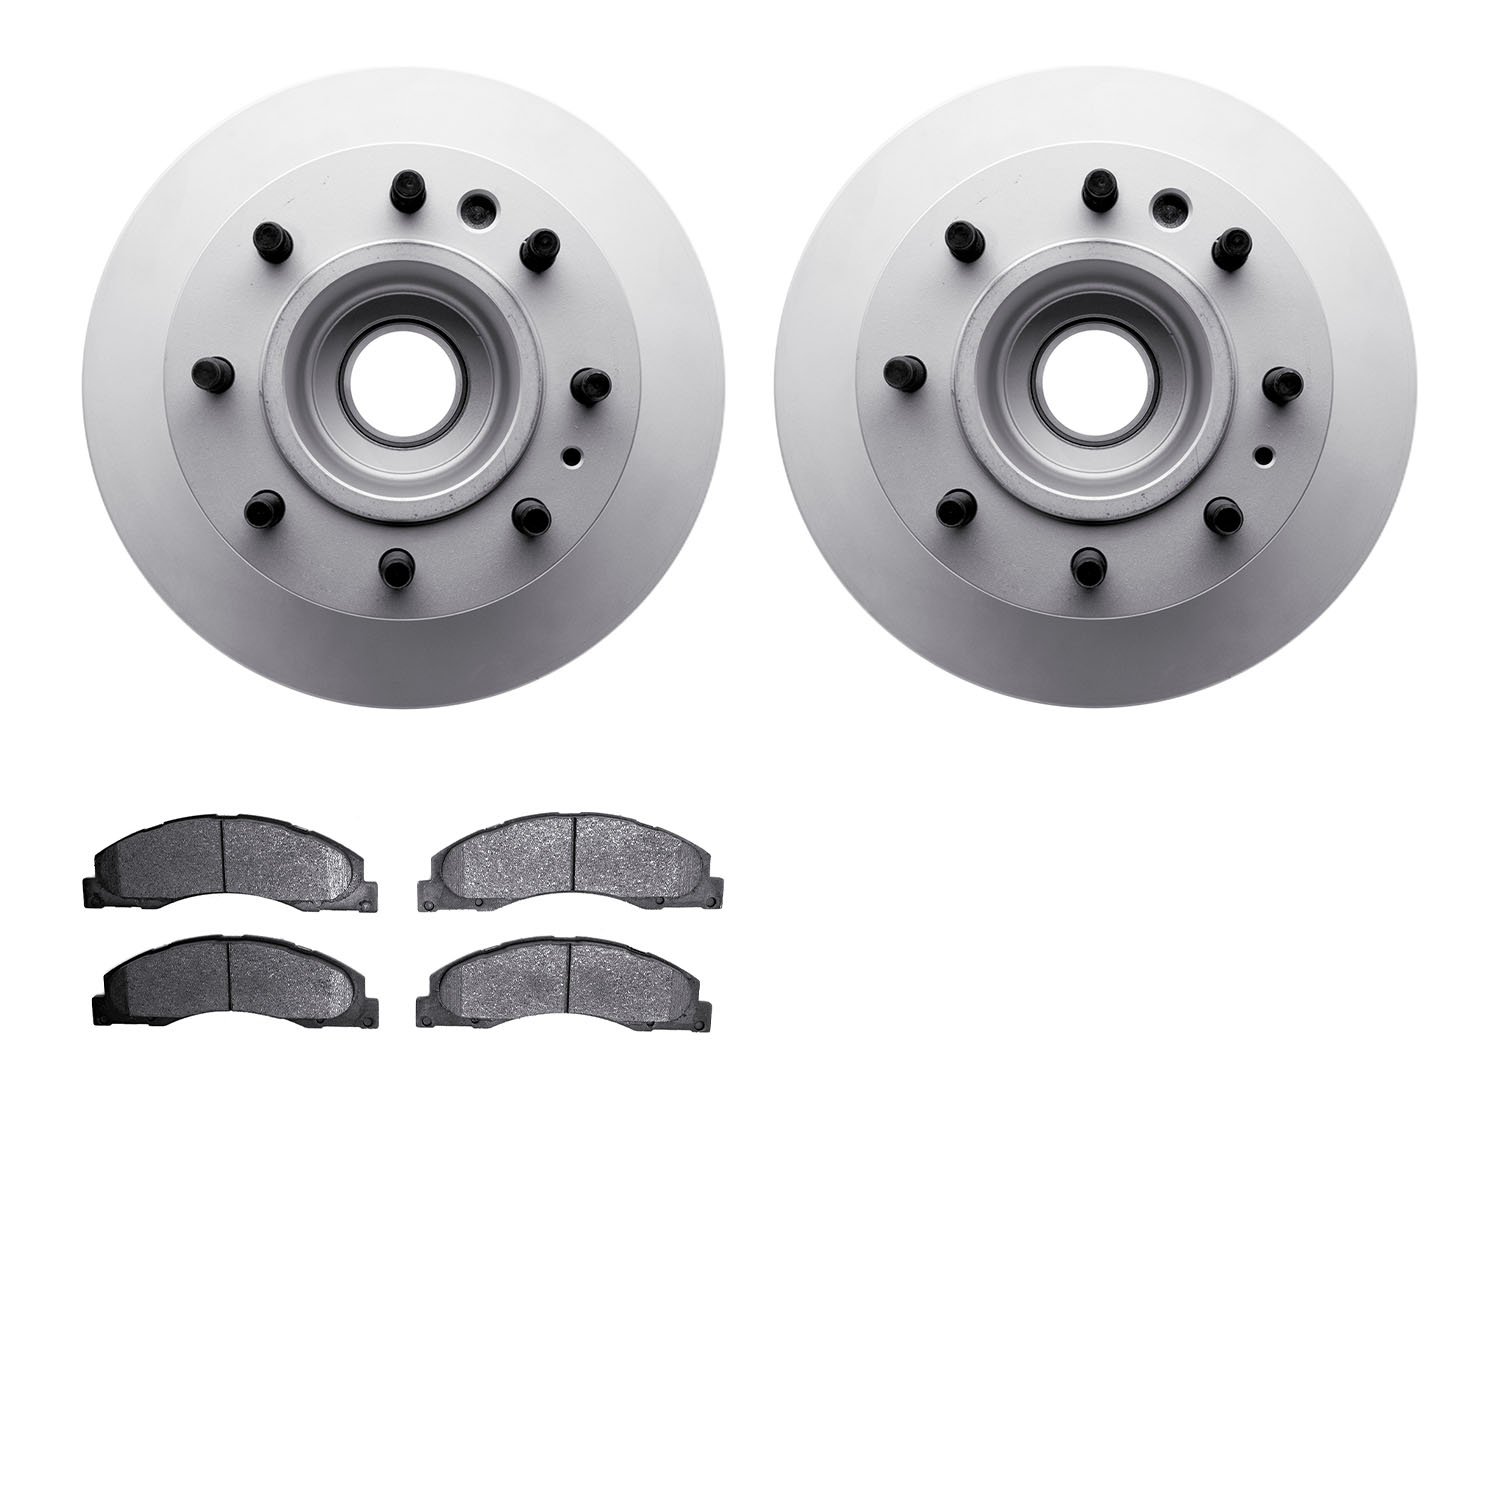 4502-99180 Geospec Brake Rotors w/5000 Advanced Brake Pads Kit, Fits Select Ford/Lincoln/Mercury/Mazda, Position: Front